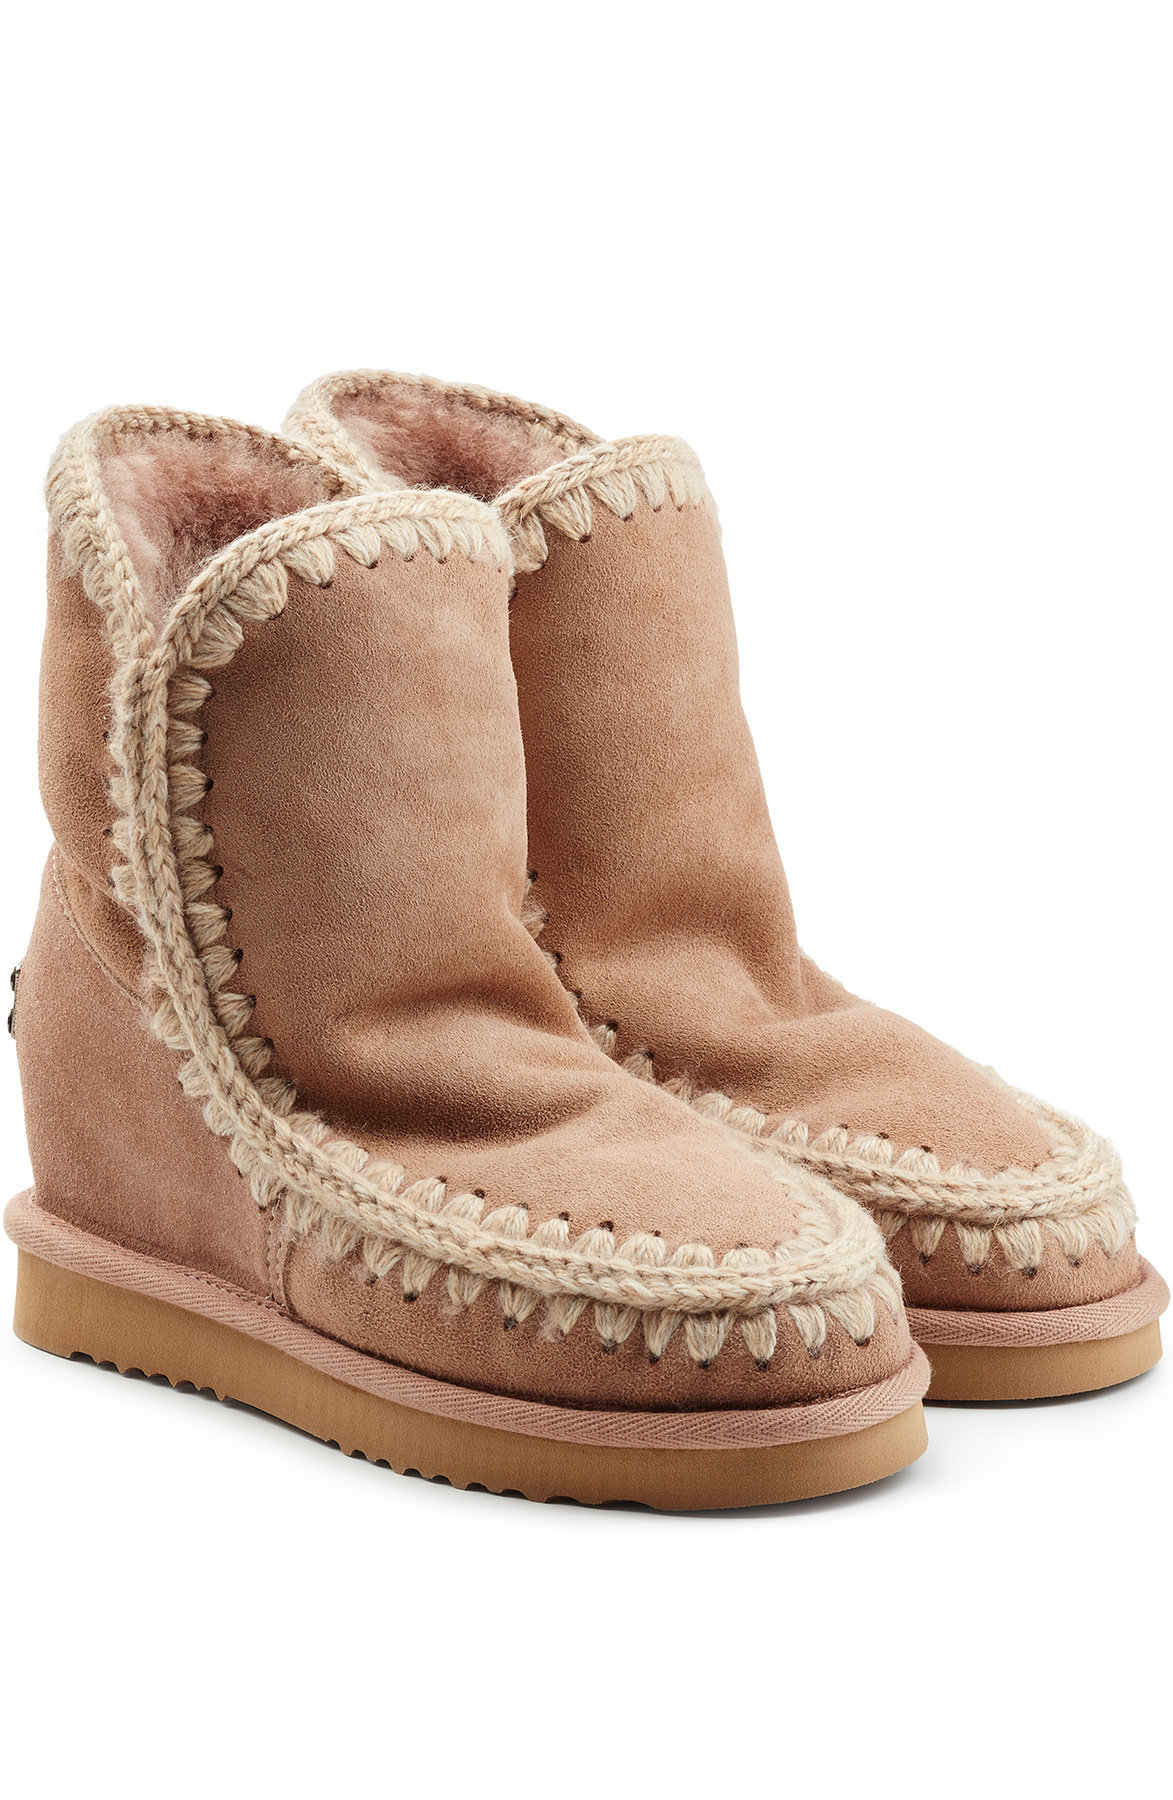 Short Sheepskin Wedge Boots by Mou